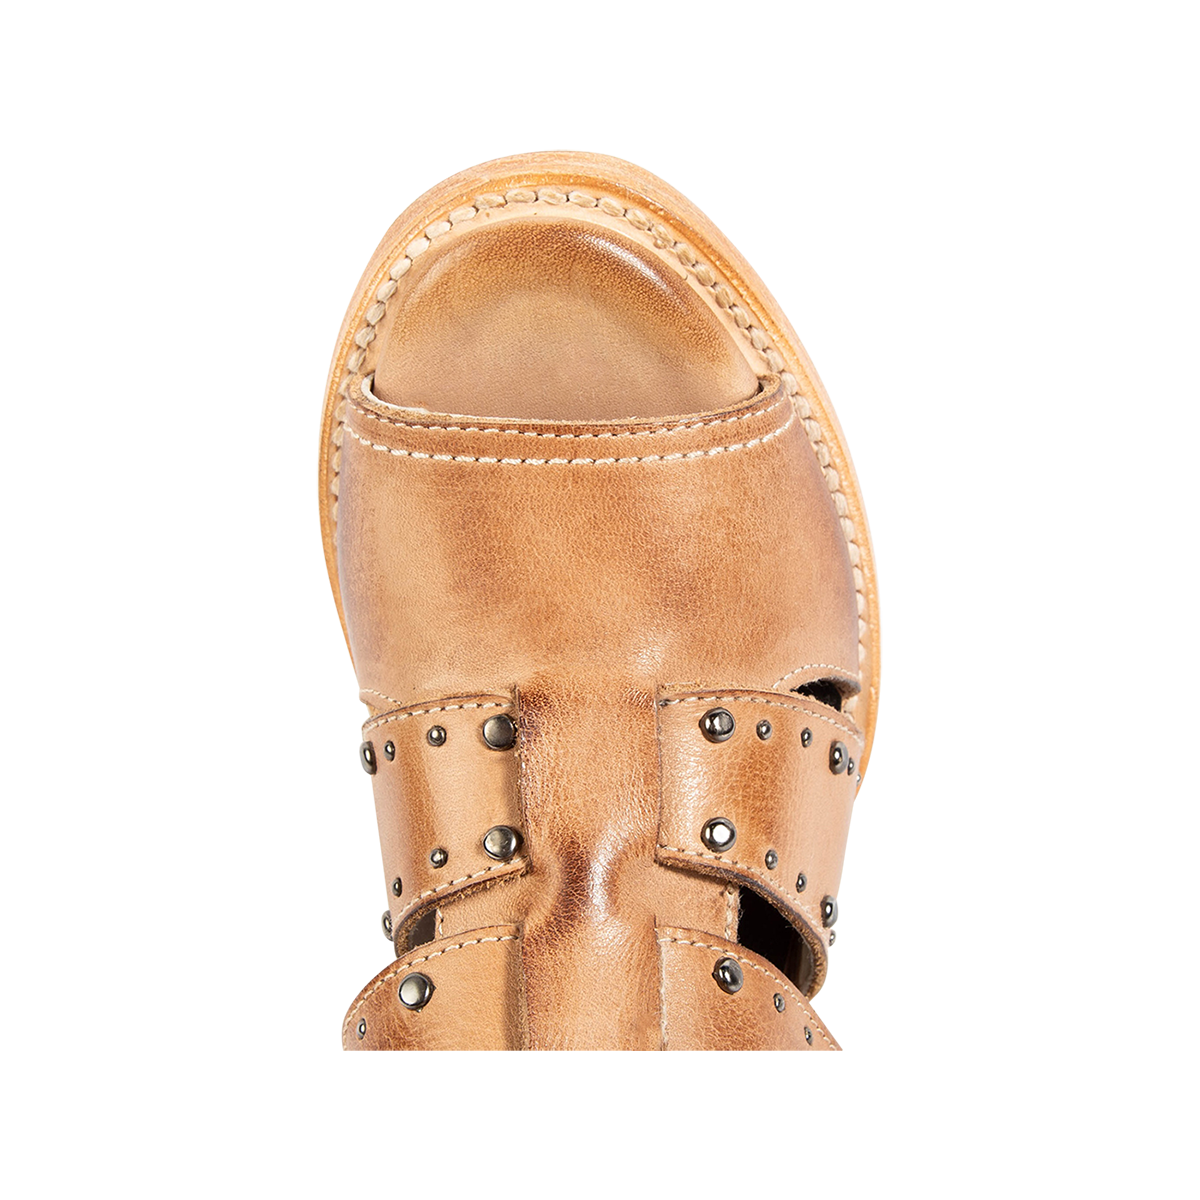 Top view showing a rounded toe and metal embellishments on FREEBIRD women's Ghost natural leather sandal